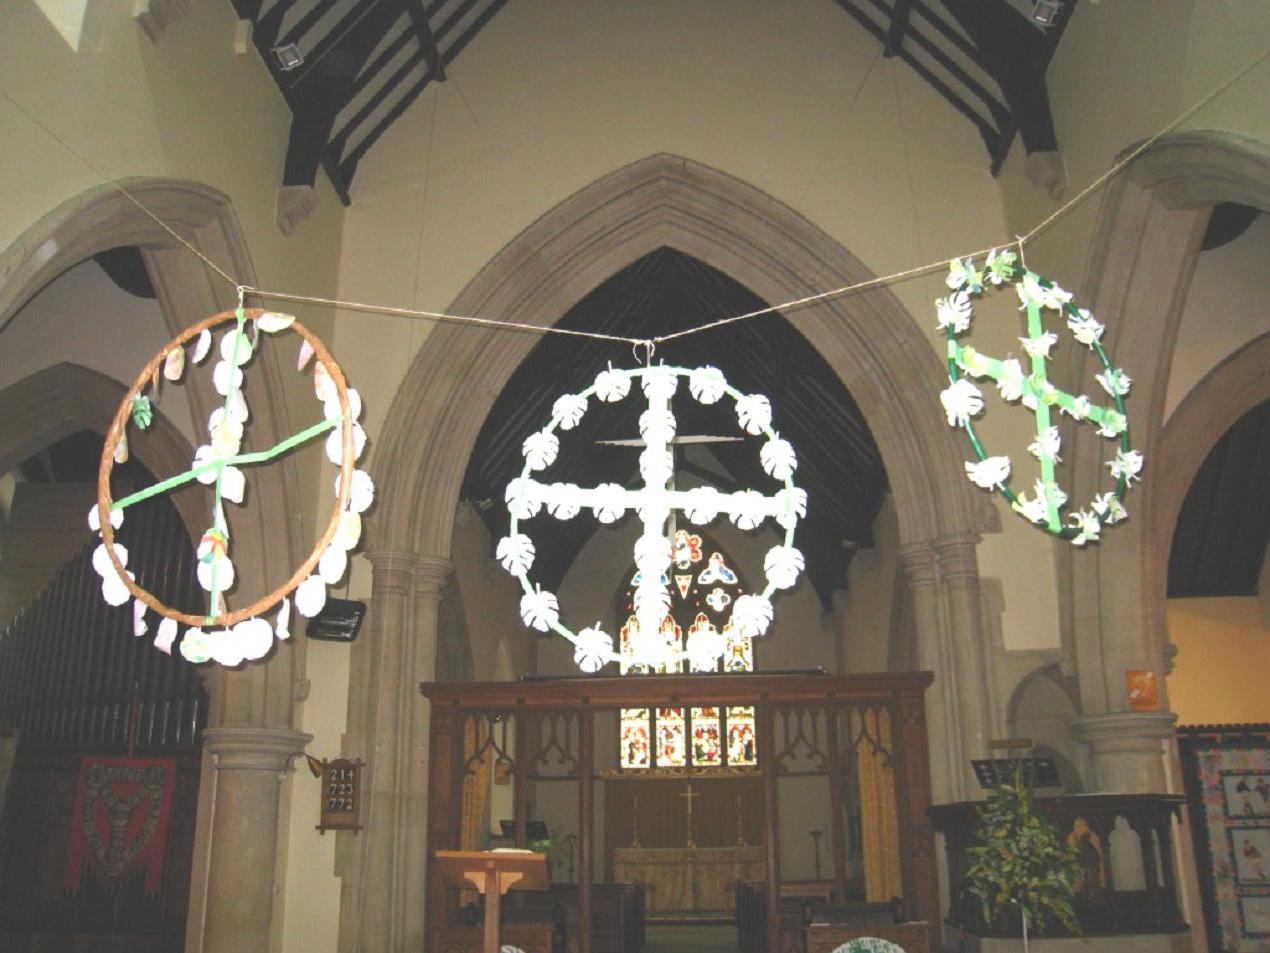 Glowing paper chandeliers, made by children of Trinity Primary School, complement the Easter cheer at Holy Trinity church.